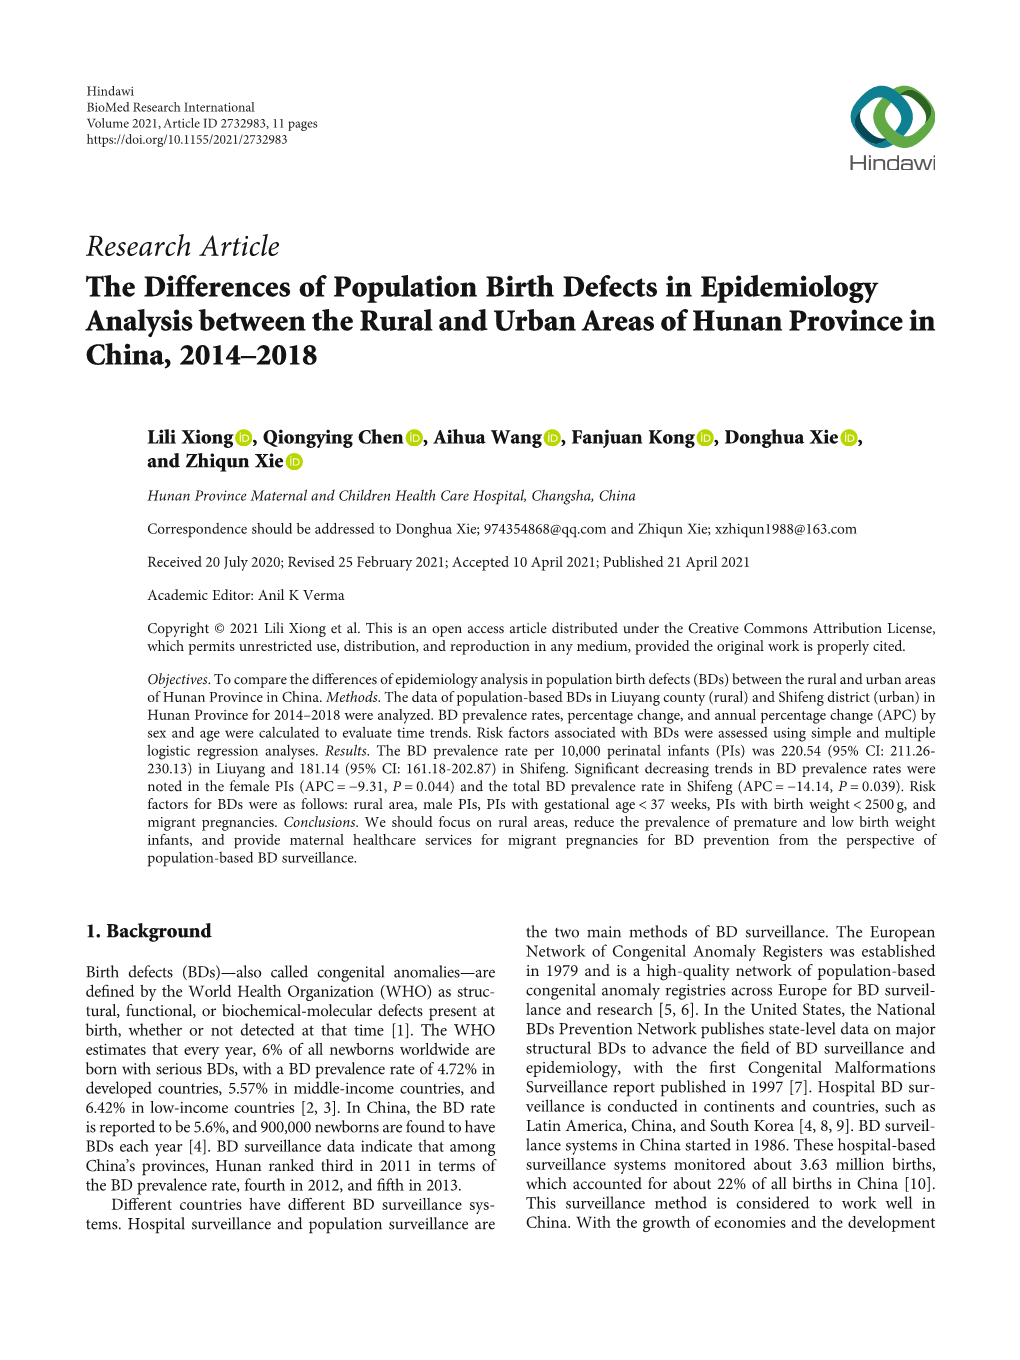 Research Article the Differences of Population Birth Defects in Epidemiology Analysis Between the Rural and Urban Areas of Hunan Province in China, 2014–2018